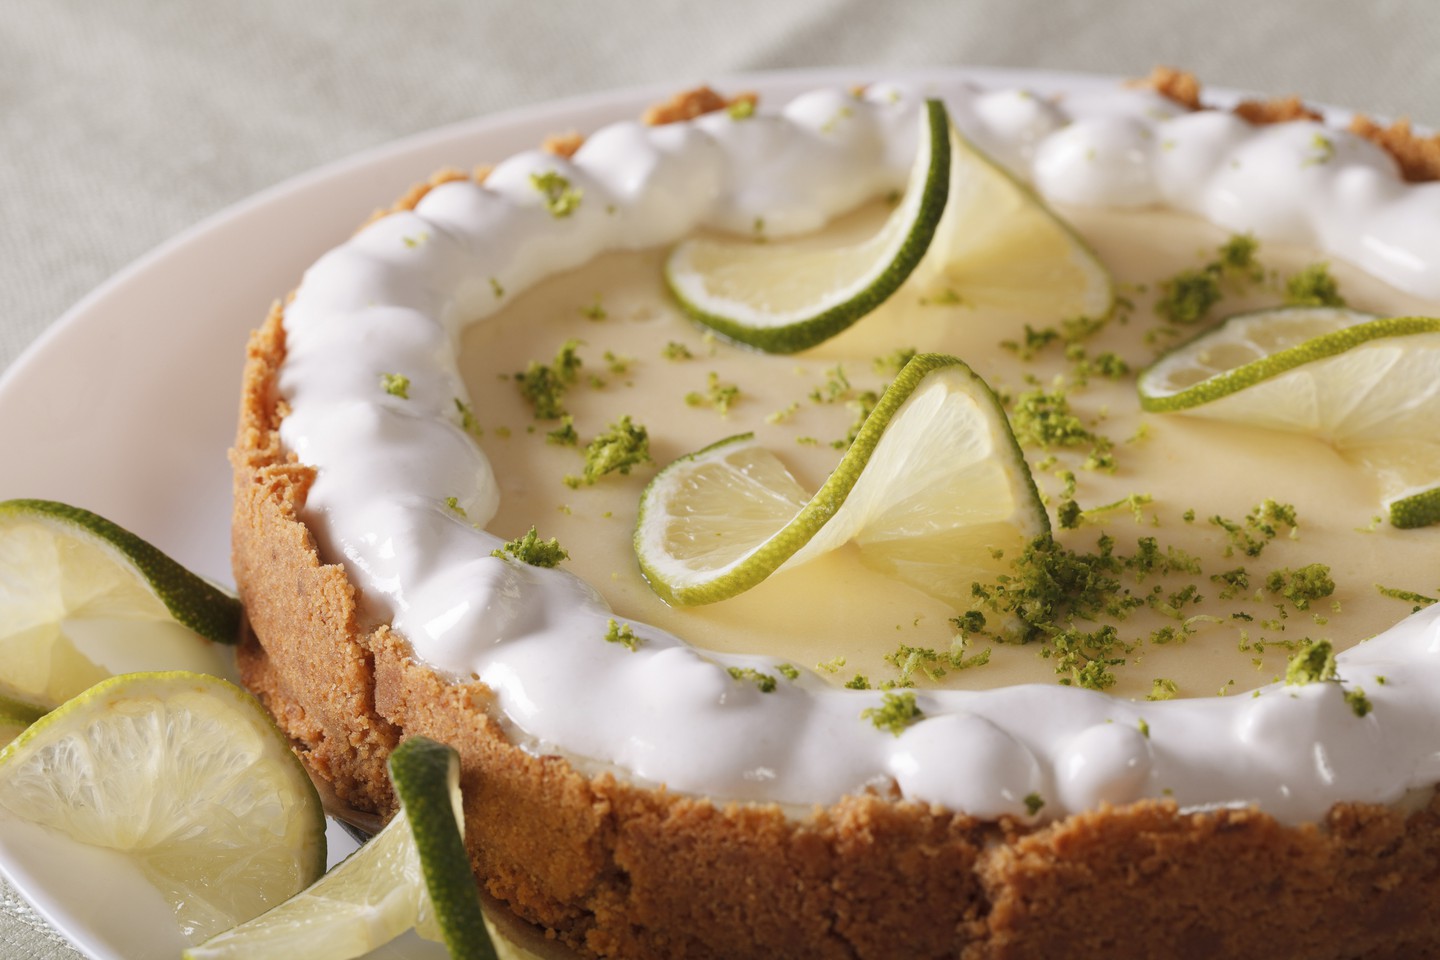 🌮 Eat an International Food for Every Letter of the Alphabet If You Want Us to Guess Your Generation Key Lime Pie